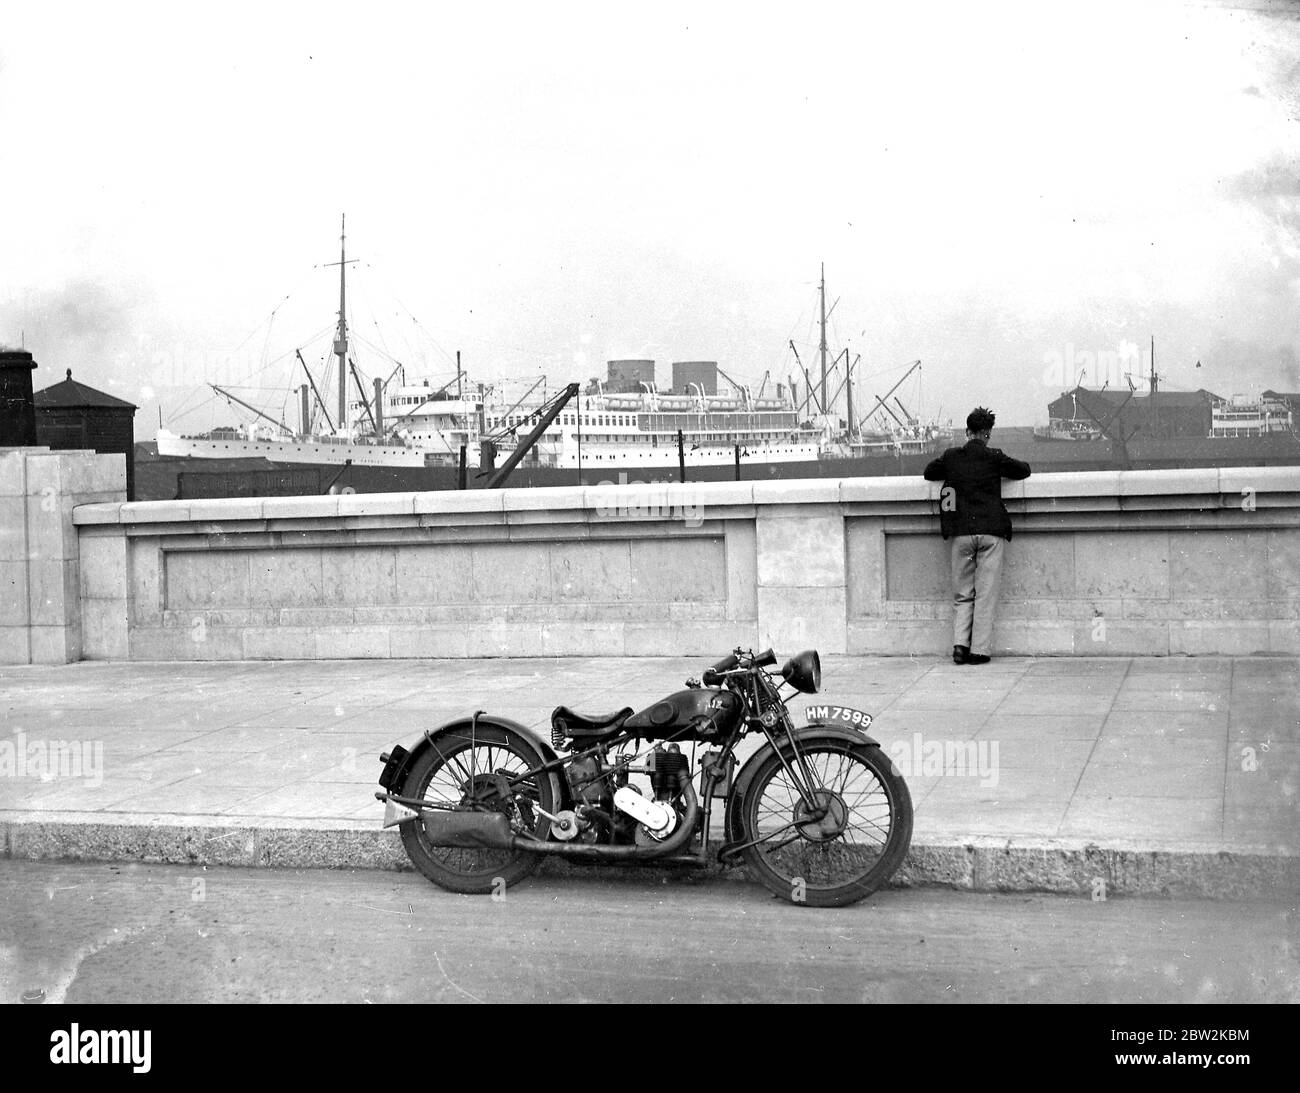 Silvertown Way avec Motorcycler. 1934 Banque D'Images